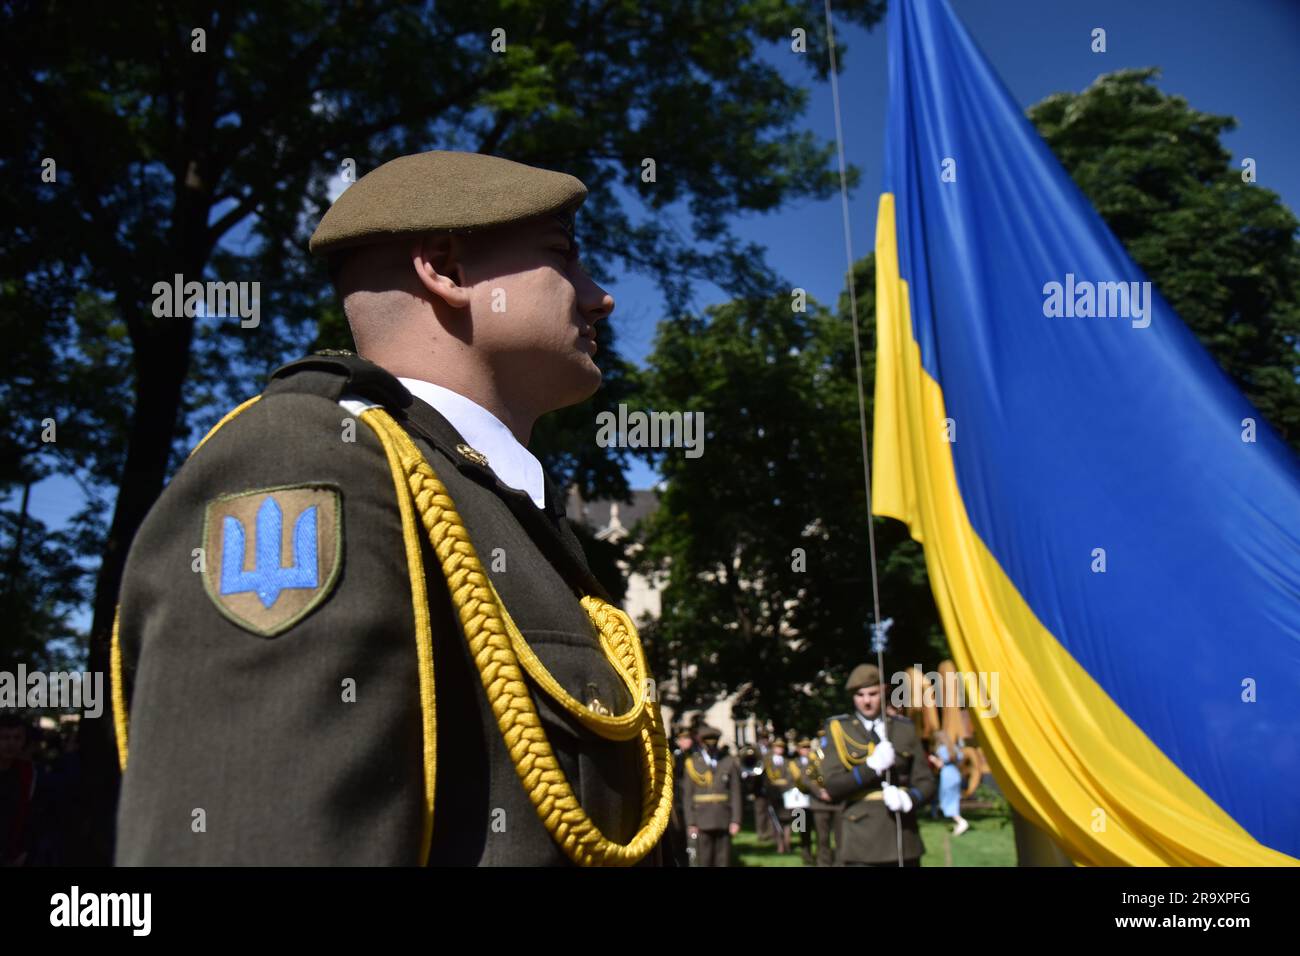 The ceremony of raising the national flag during the celebration of the Constitution Day of Ukraine. Ukraine celebrated the 27th anniversary of the adoption of the country's basic law - the constitution. In the conditions of the Russian-Ukrainian war, official events were very short. In Lviv, the Ukrainian flag was raised, honor guard marched, and a military band performed. (Photo by Pavlo Palamarchuk / SOPA mages/Sipa USA) Stock Photo